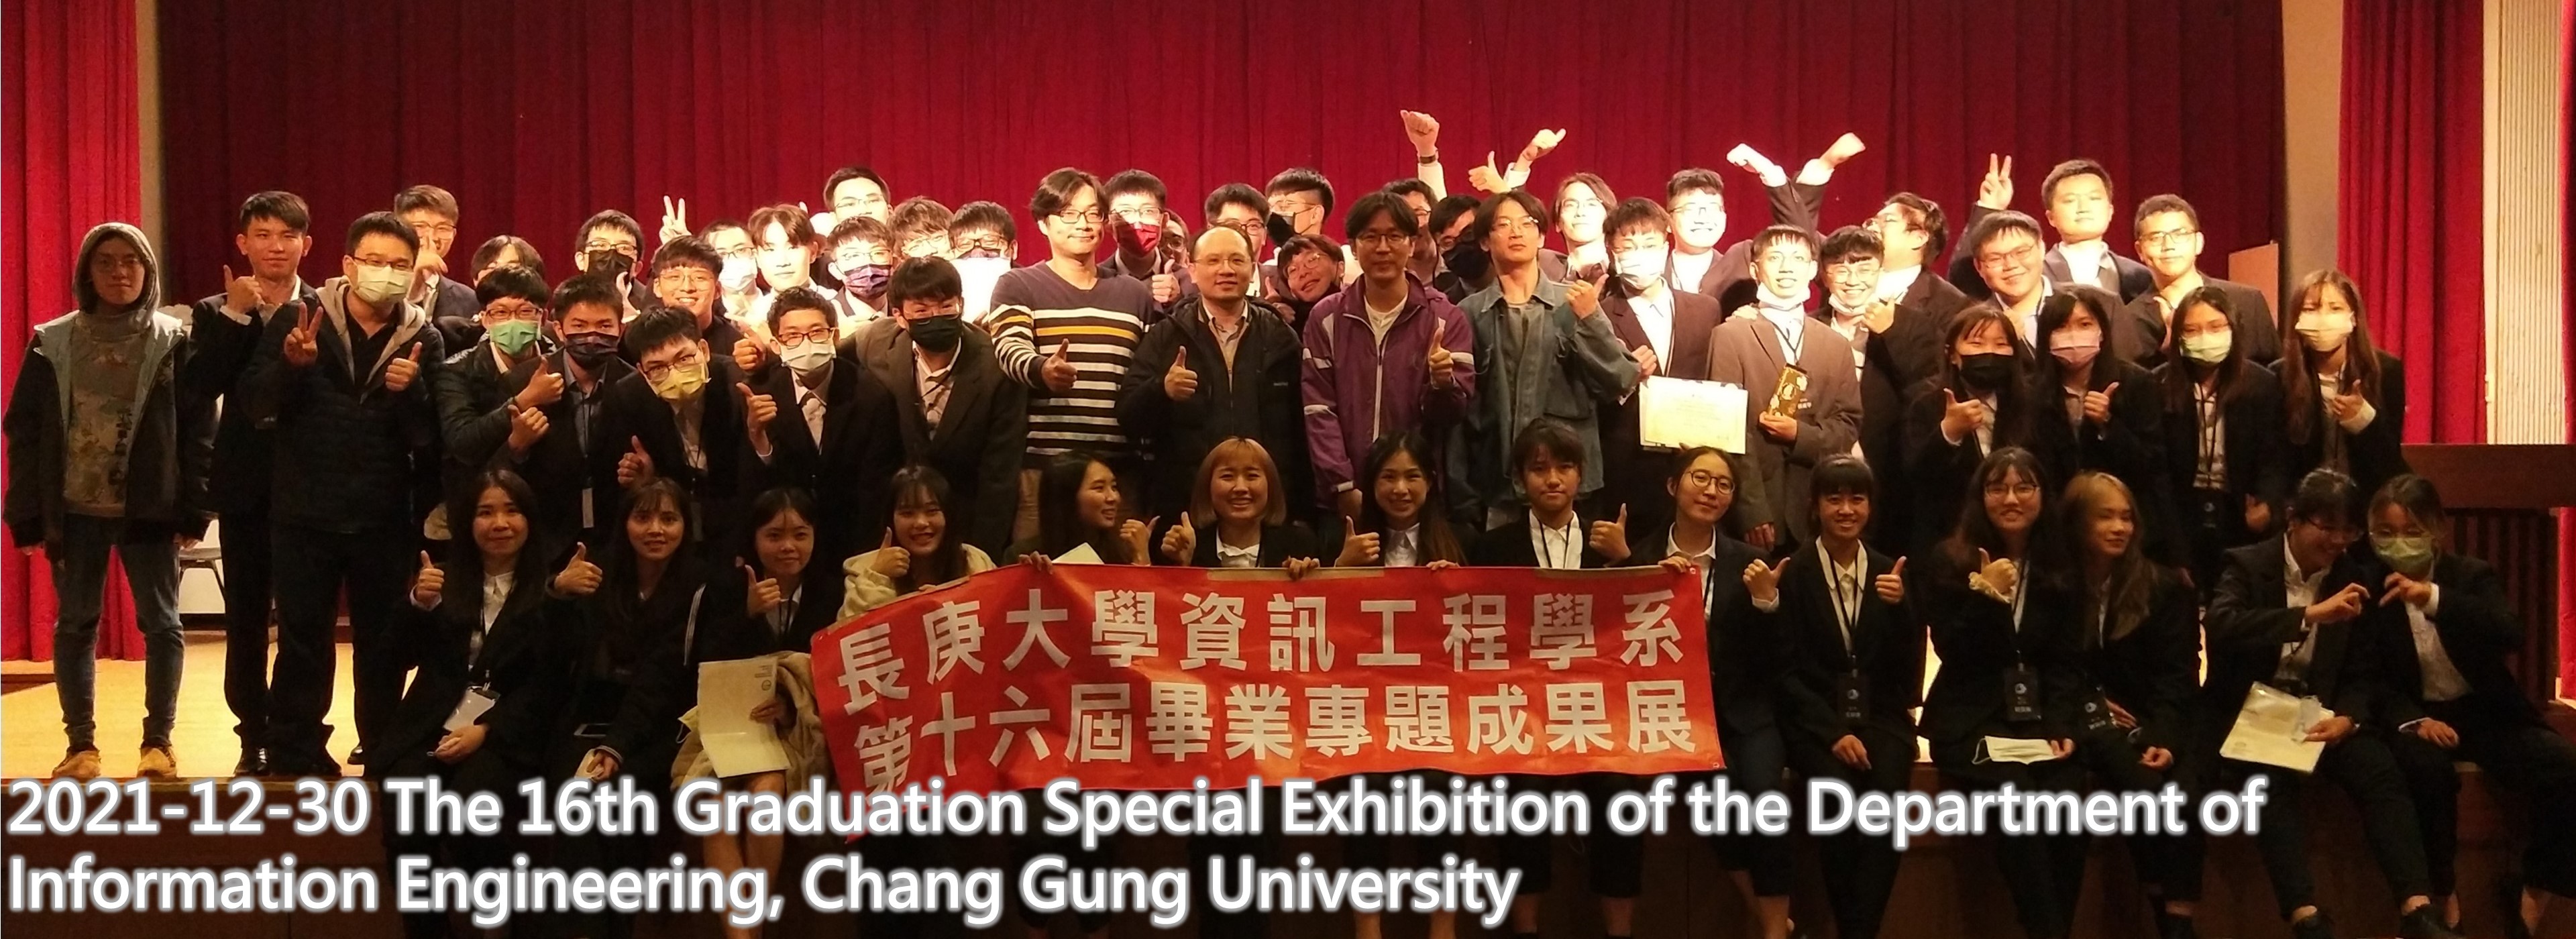 2021-12-30 The 16th Graduation Special Exhibition of the Department of Information Engineering, Chang Gung University